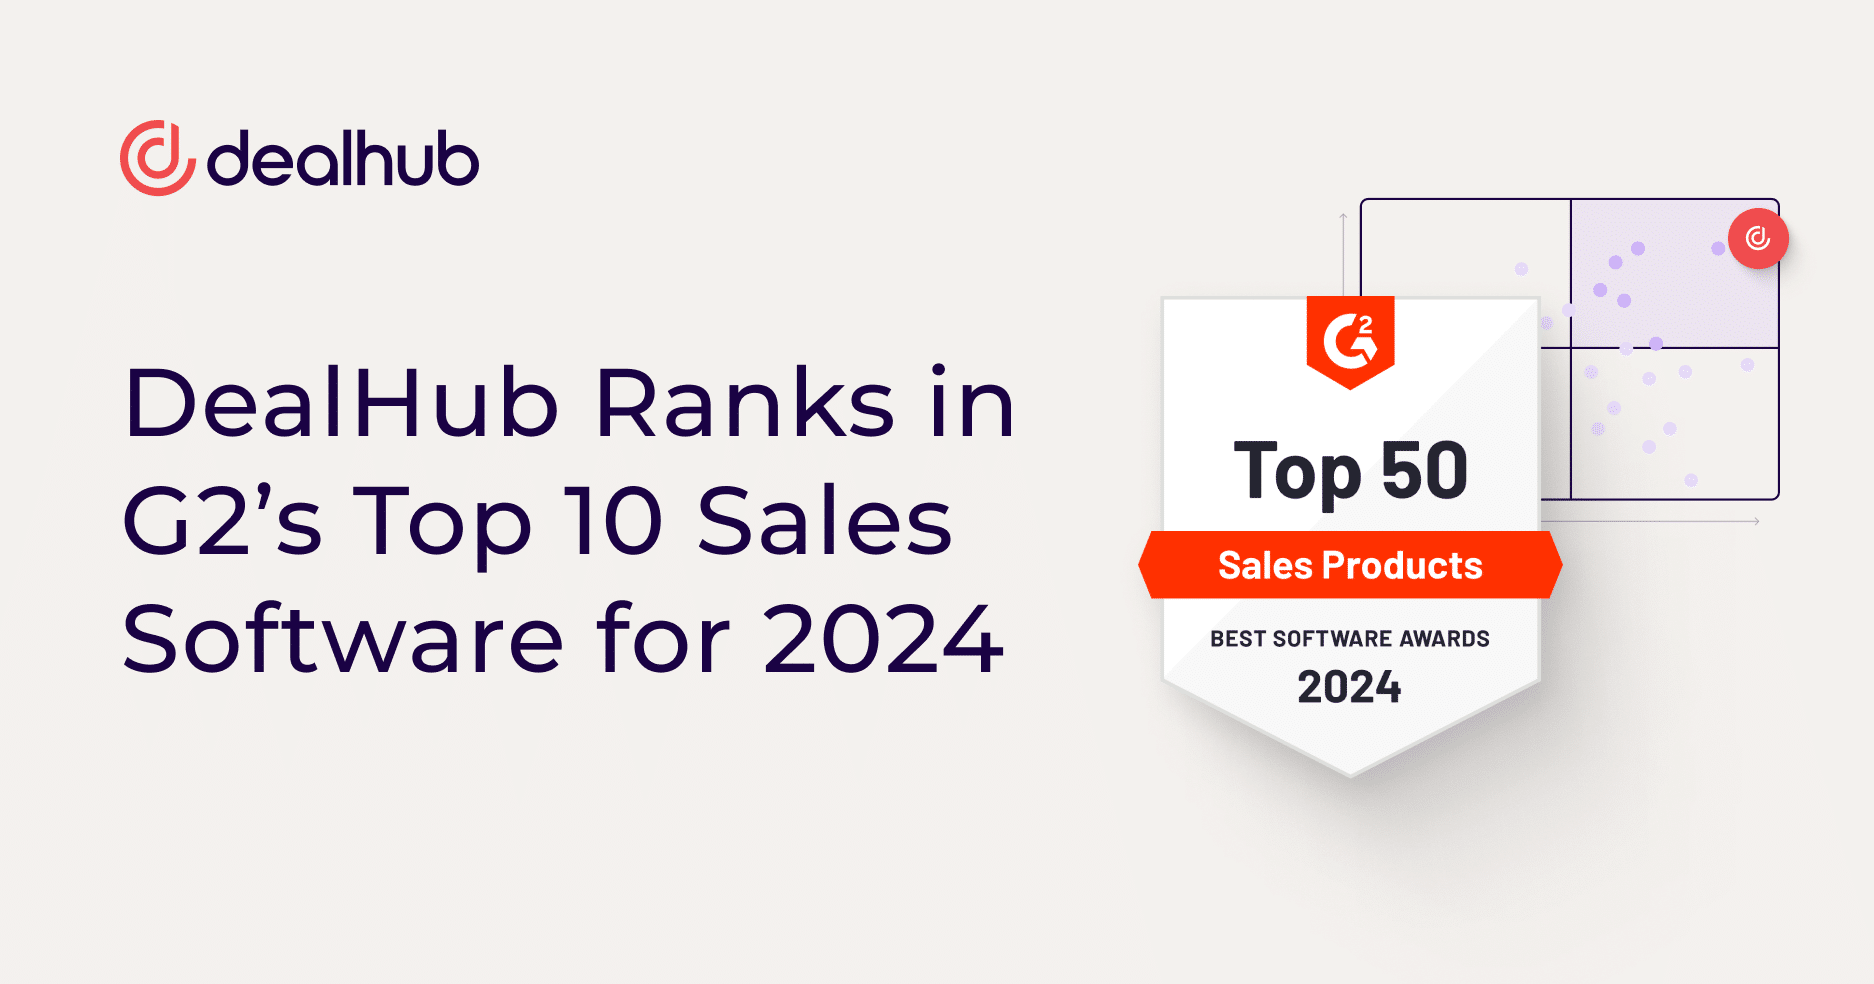 DealHub Ranks in G2’s Top 10 Sales Software for 2024